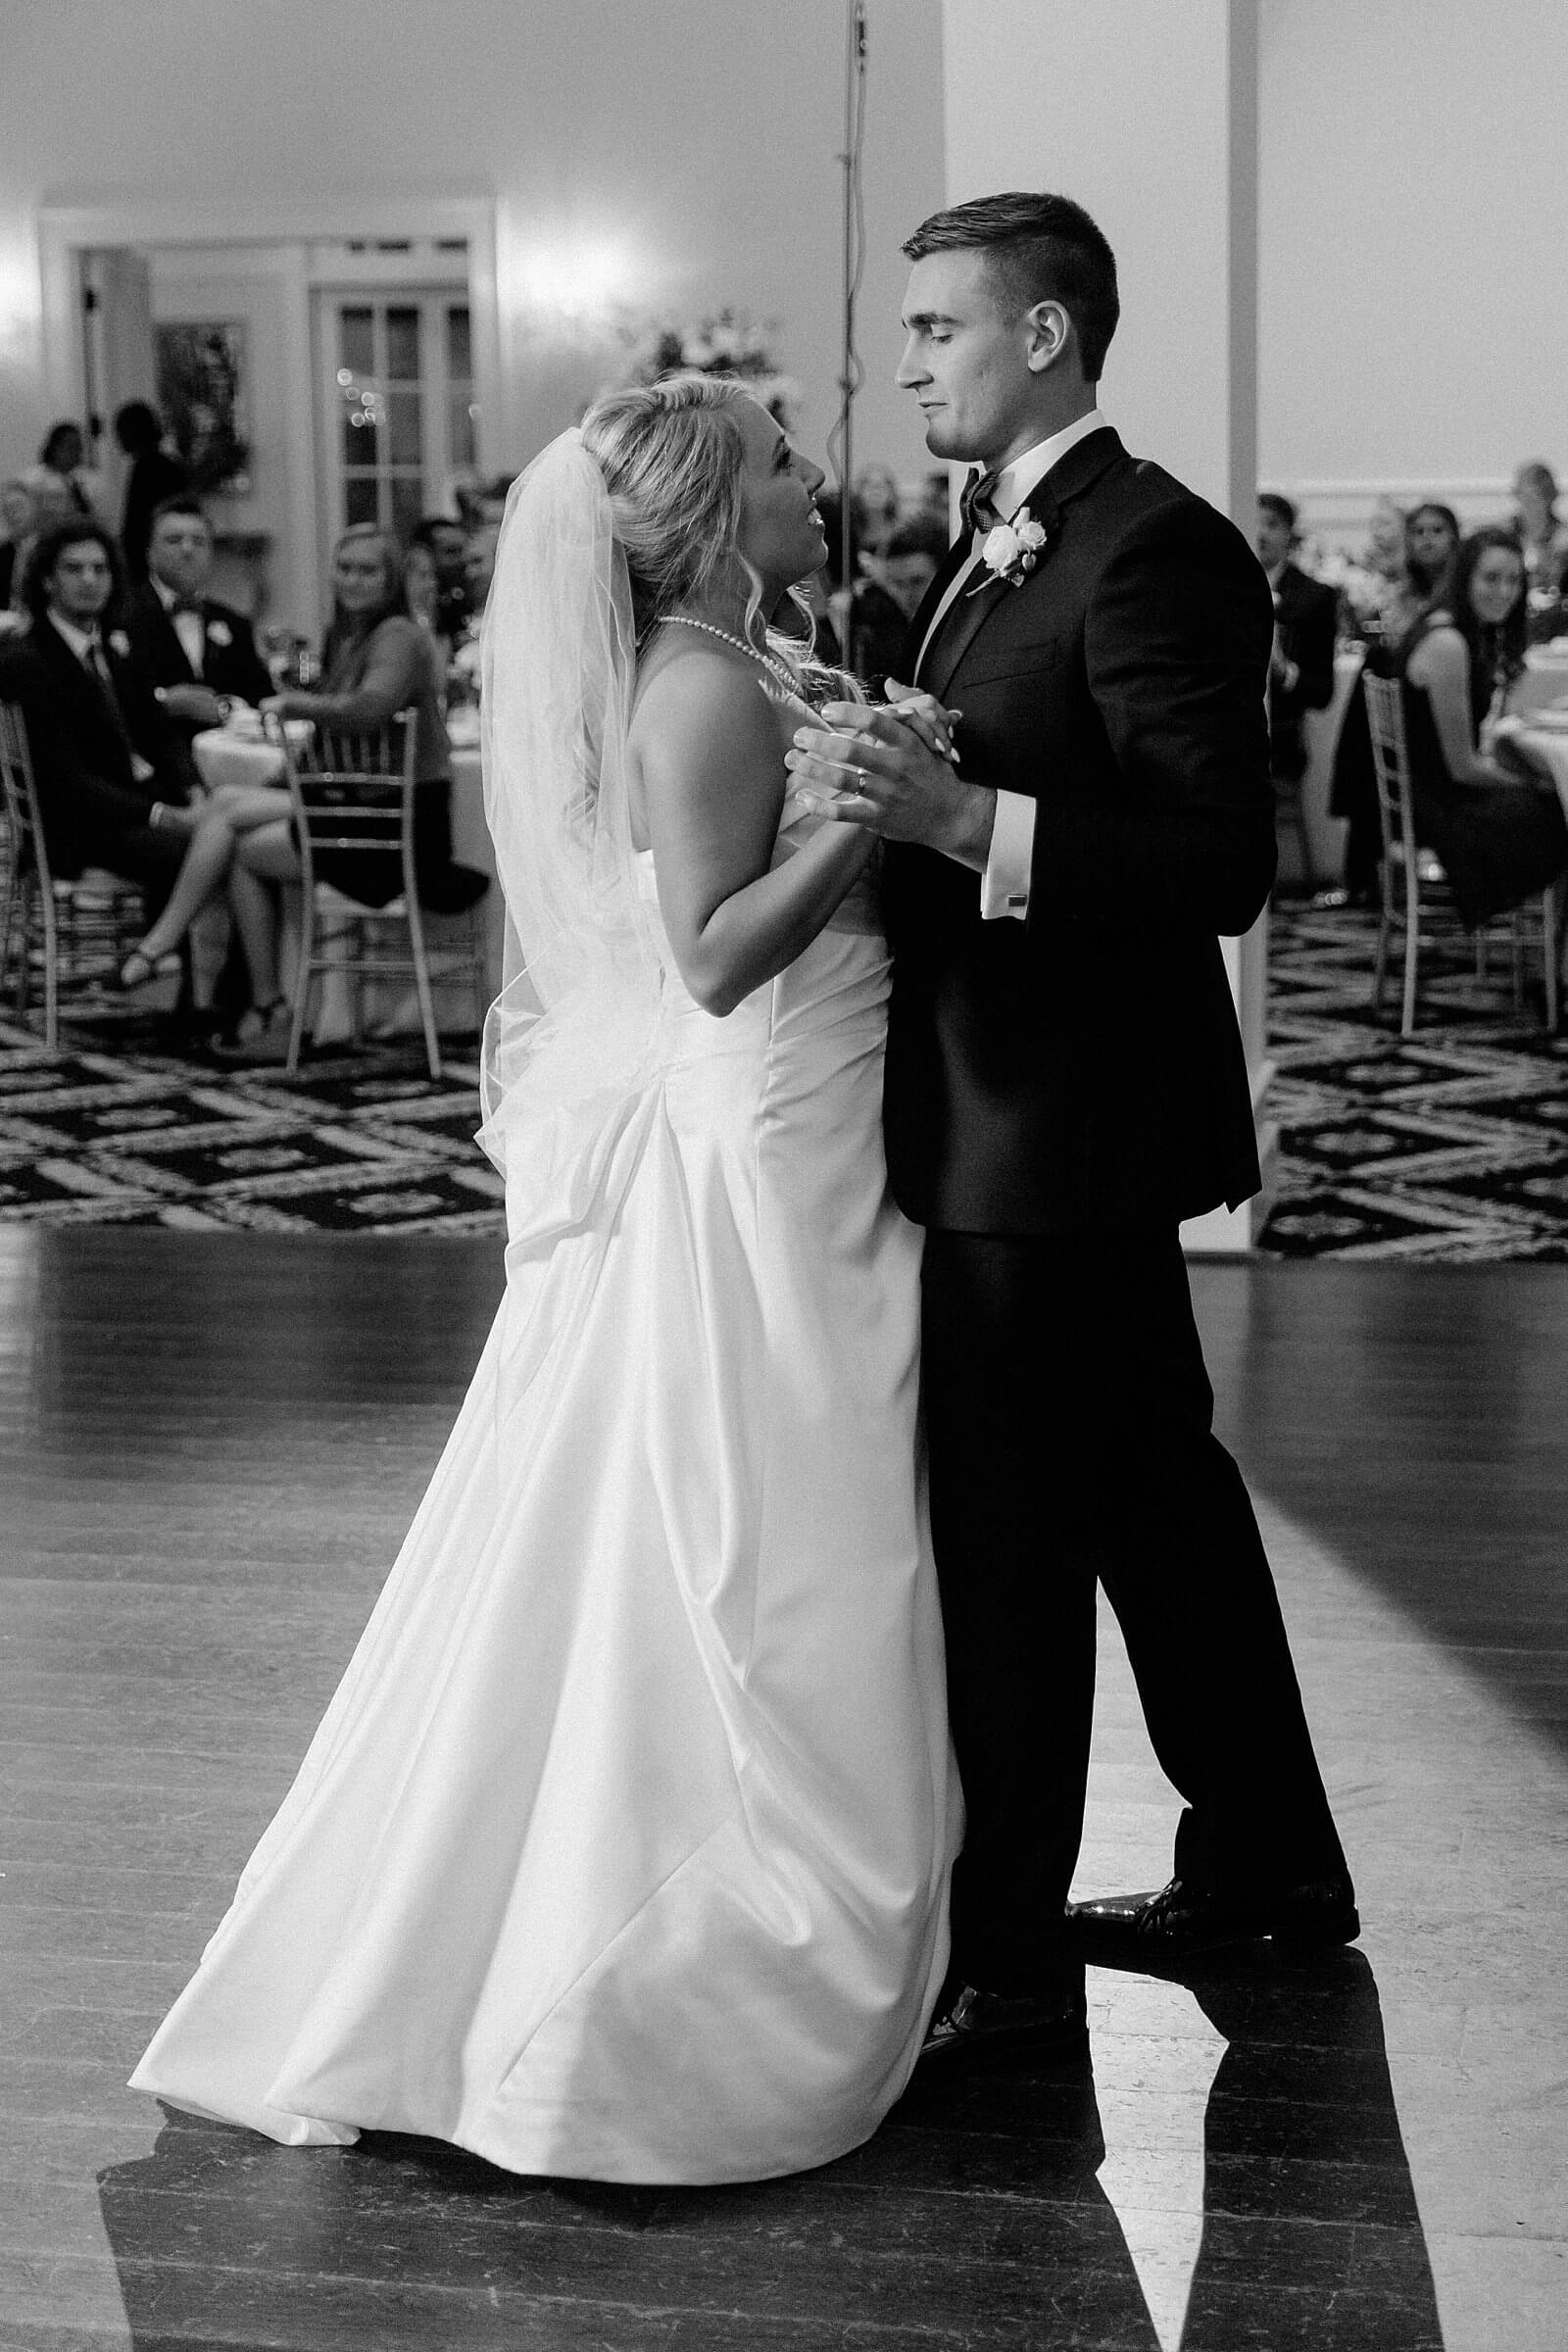 Bride and groom's first dance at a wedding at Trump Winery Grand Hall